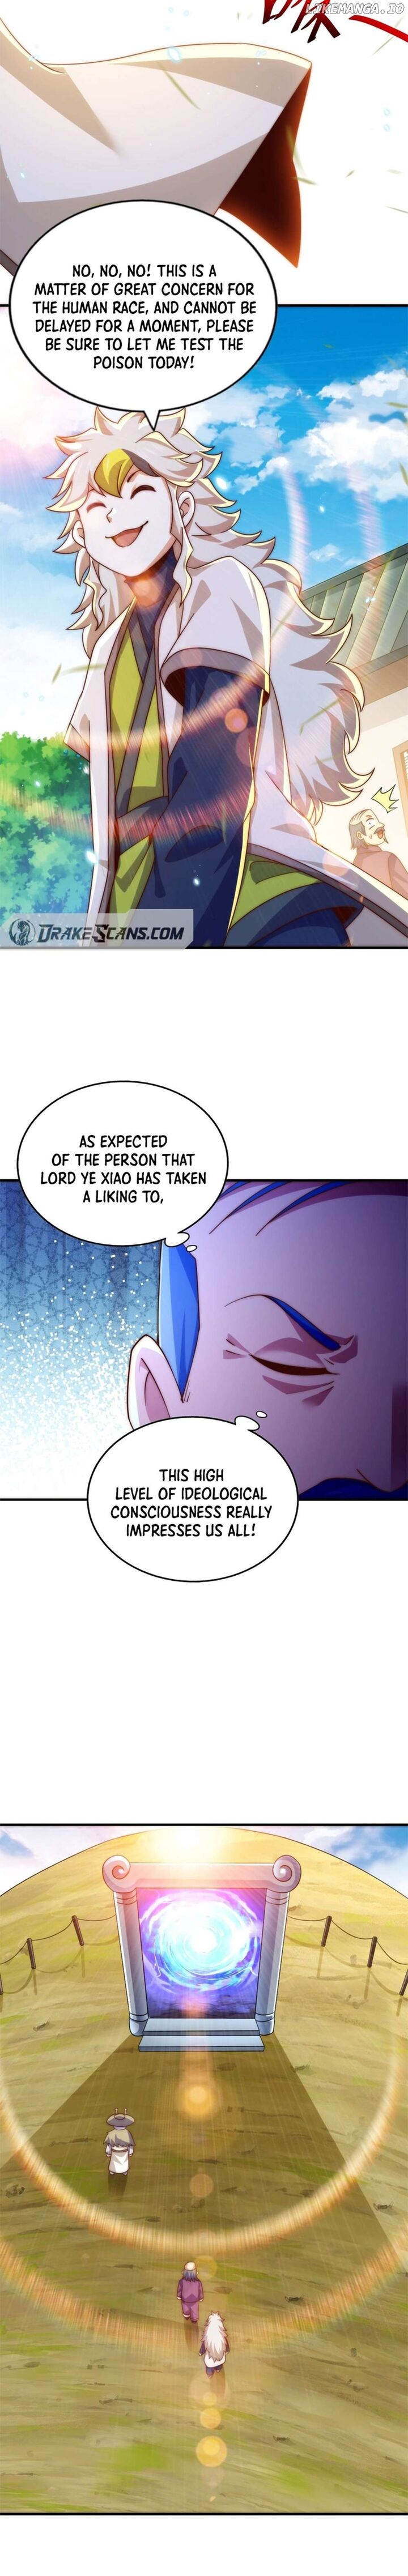 Beyond Myriad Peoples Chapter 304 Page 3